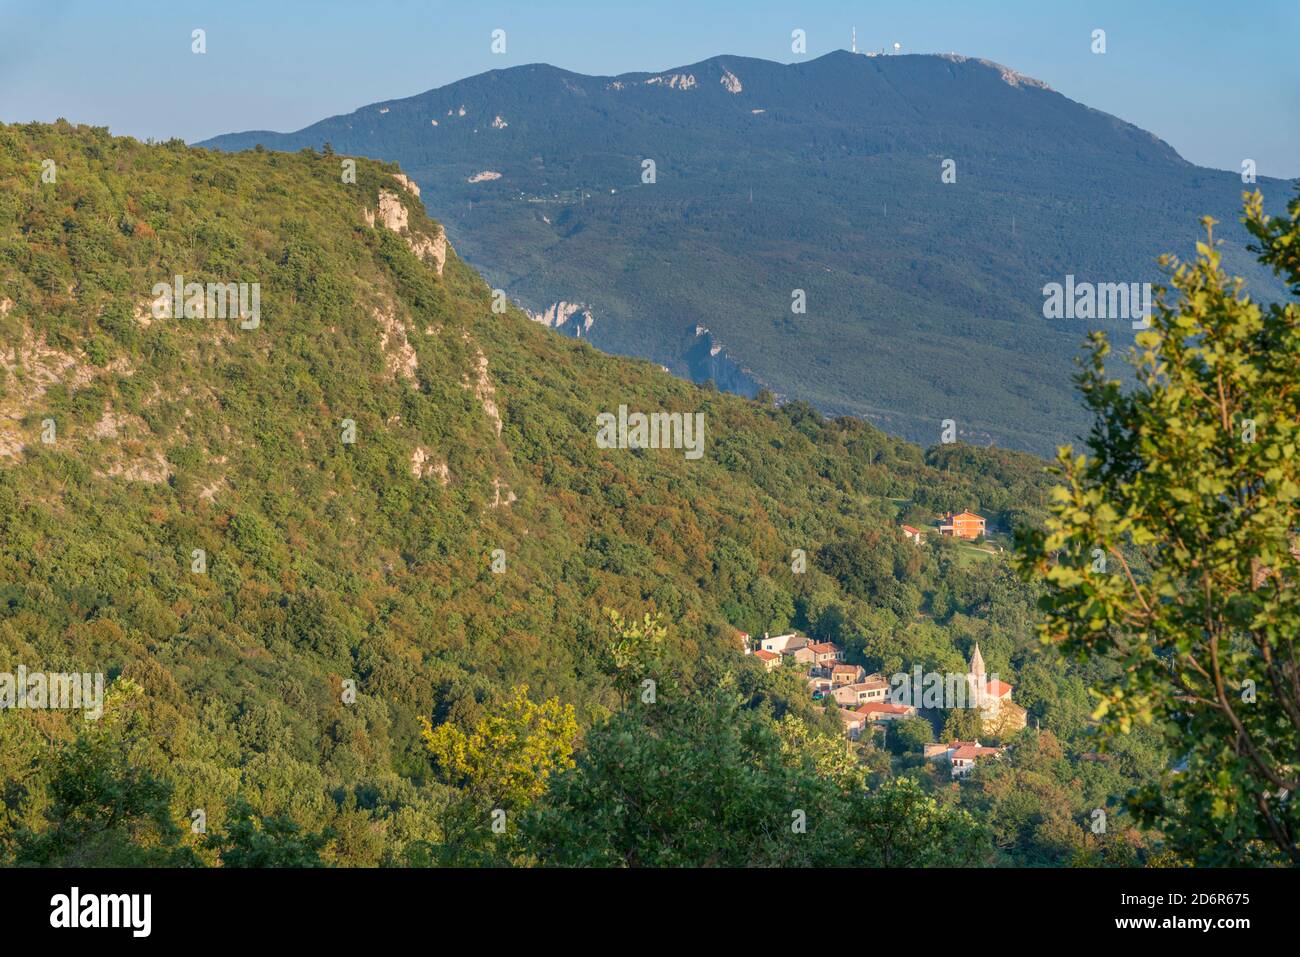 Village of Dolenja Vas and its church and Mount Vojak in the background, Istria, Croatia. Stock Photo